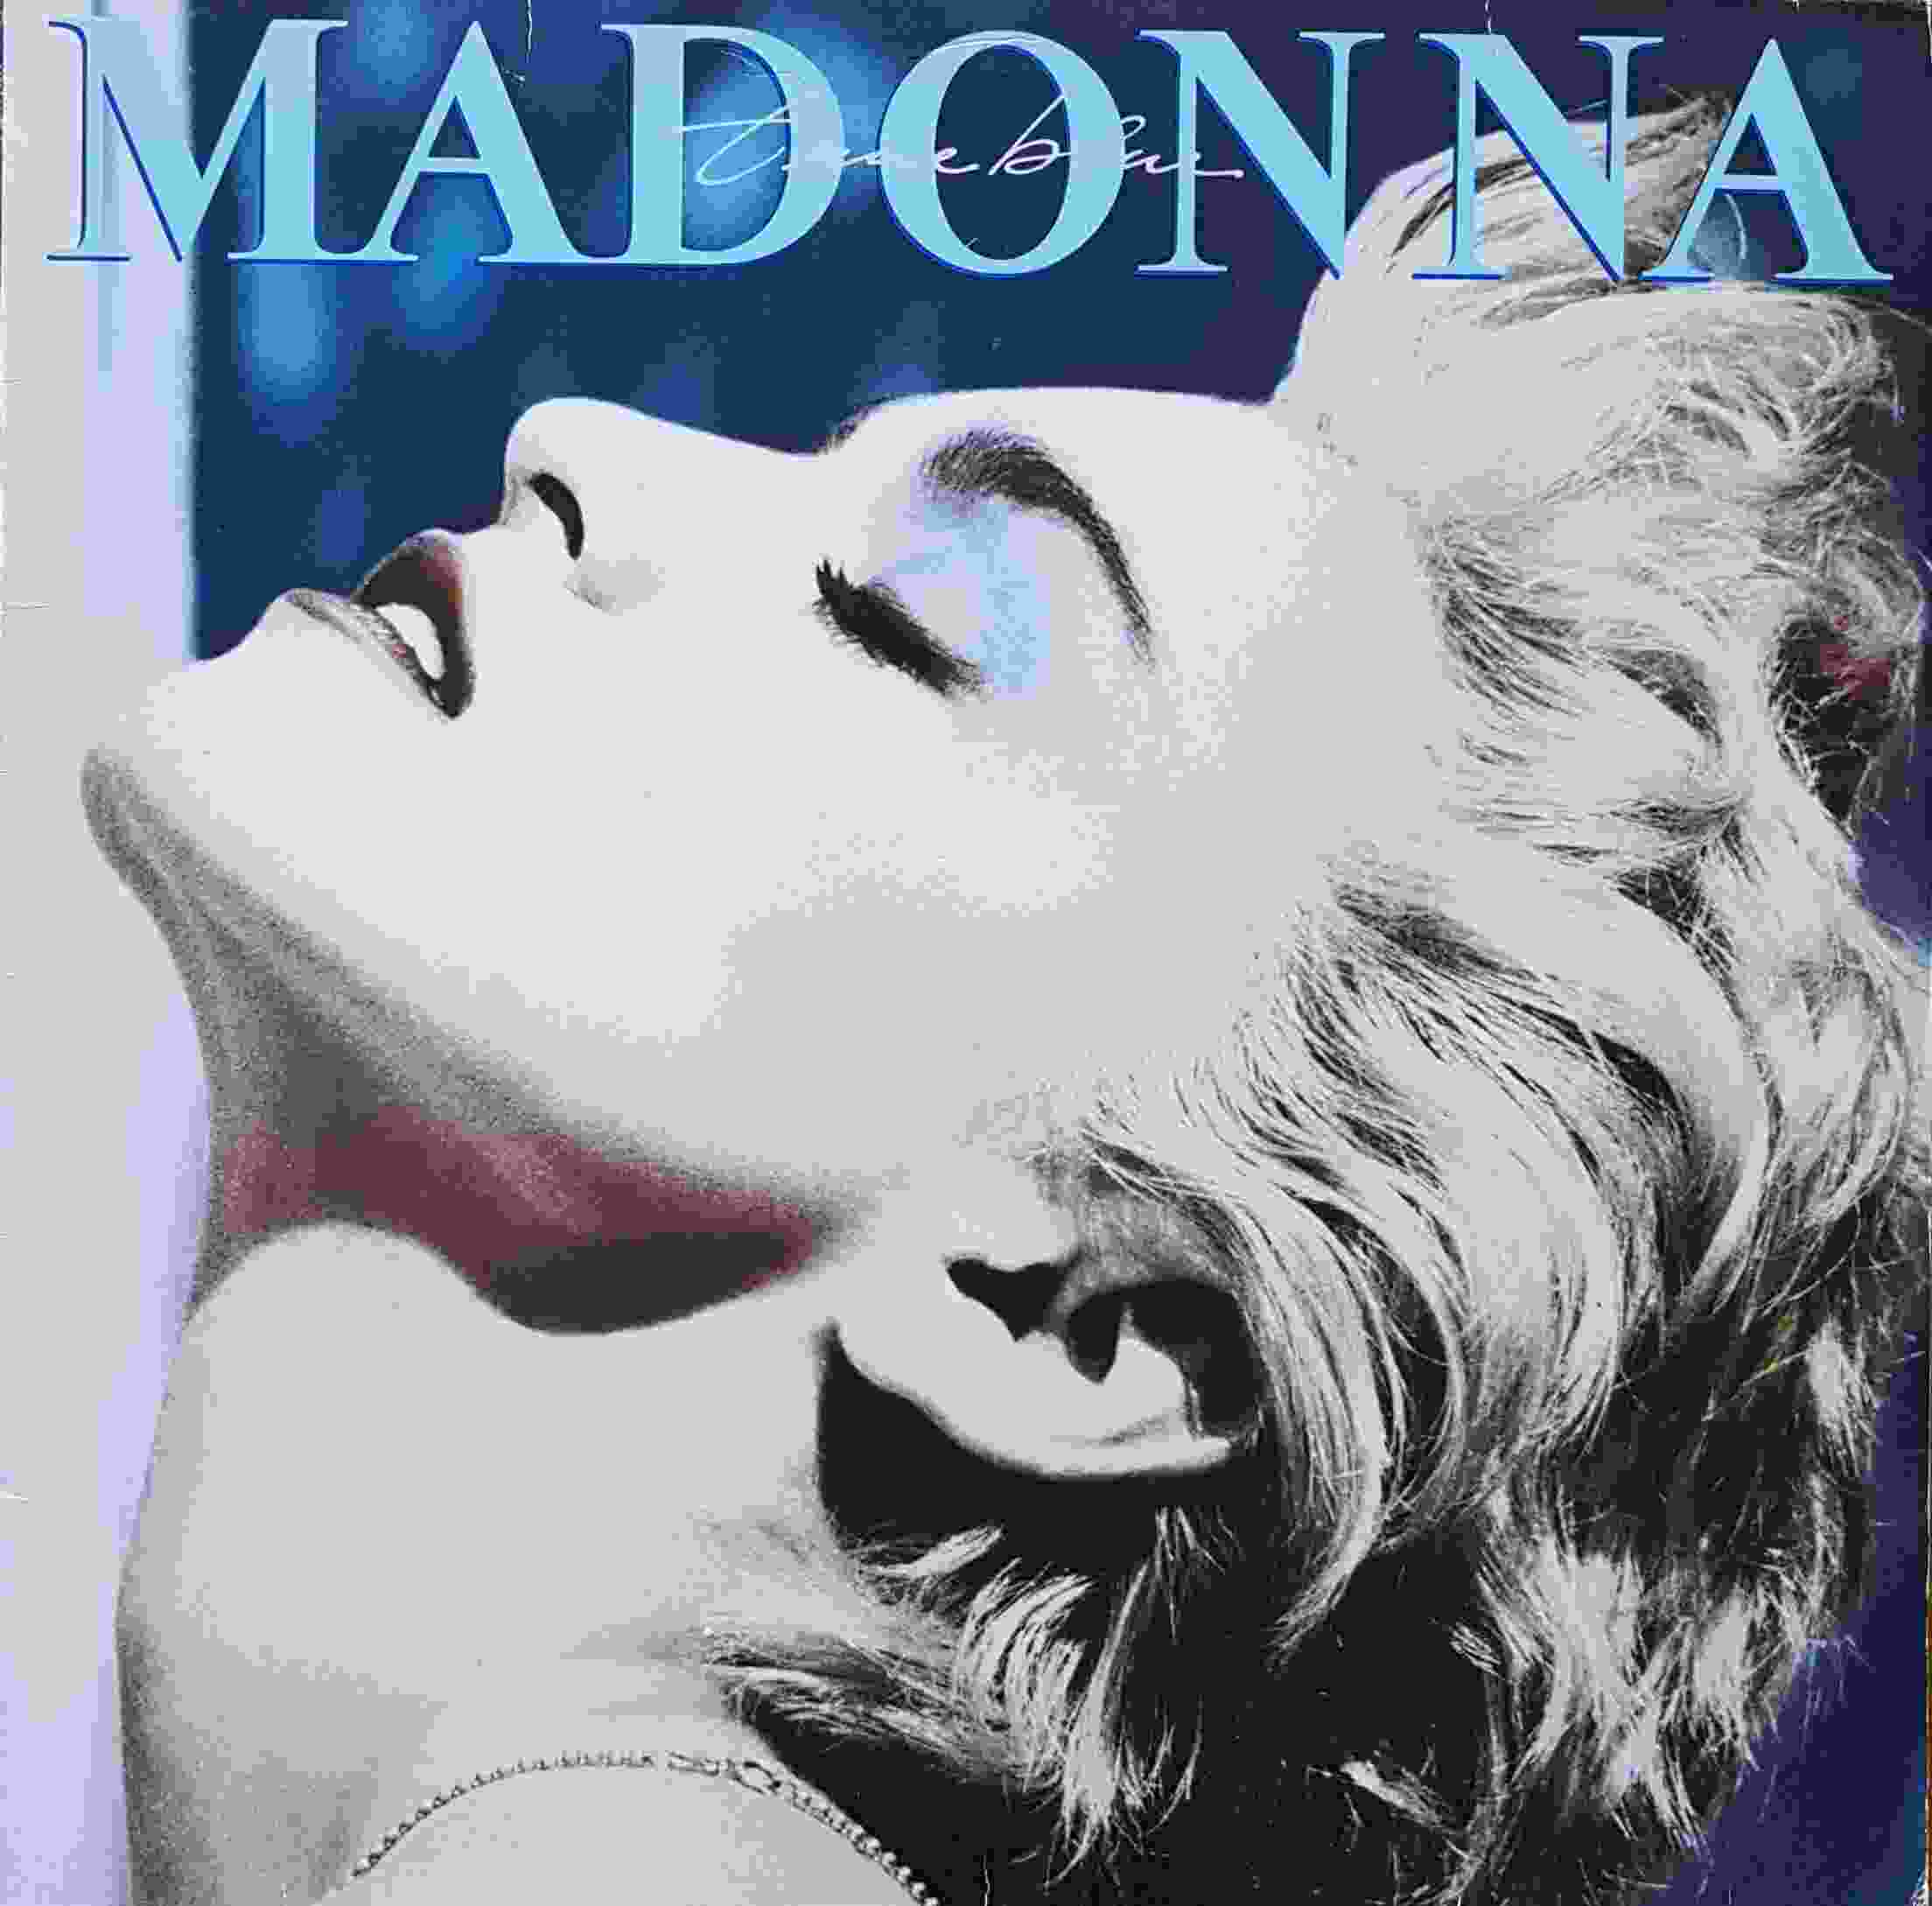 Picture of True blue by artist Madonna 